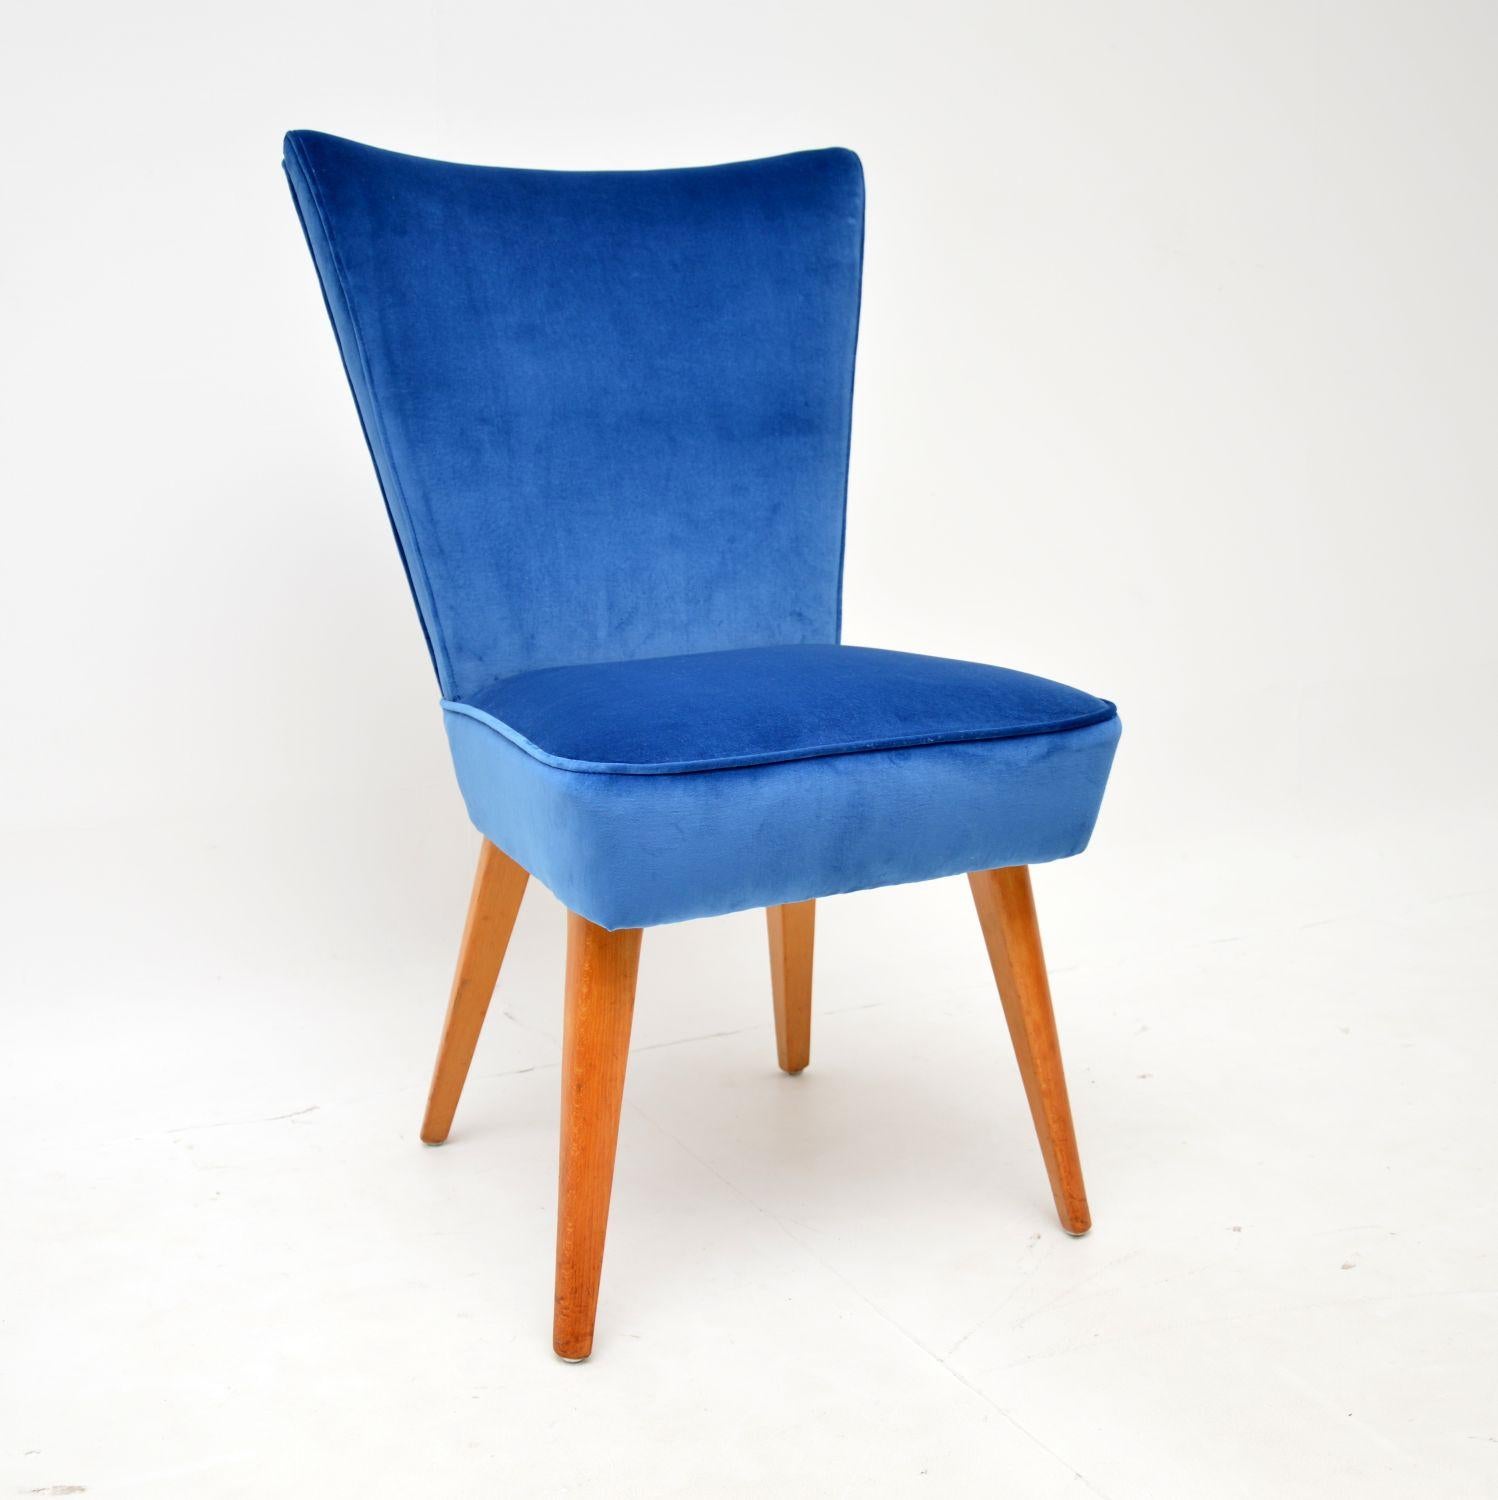 A beautiful and elegant vintage cocktail chair, this was made by Howard Keith, it dates from the 1950’s.

This has an incredibly stylish designed, with a fan shaped back rest and beautifully tapered legs.

We have had this newly upholstered in a